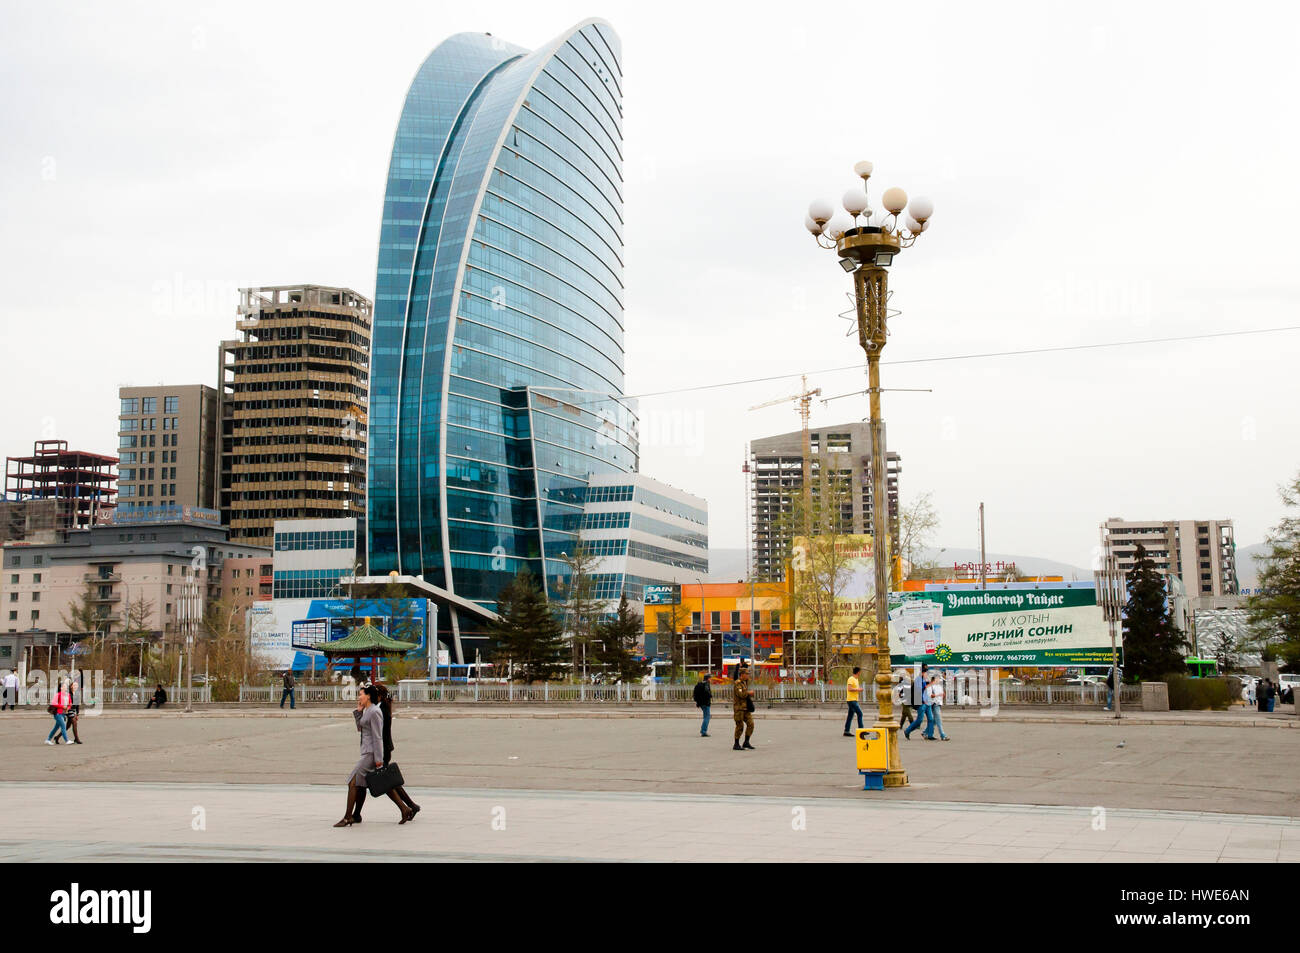 ULAANBAATAR, MONGOLIA - May 10, 2012: Commercial buildings on Chinggis Square in the capital city Stock Photo